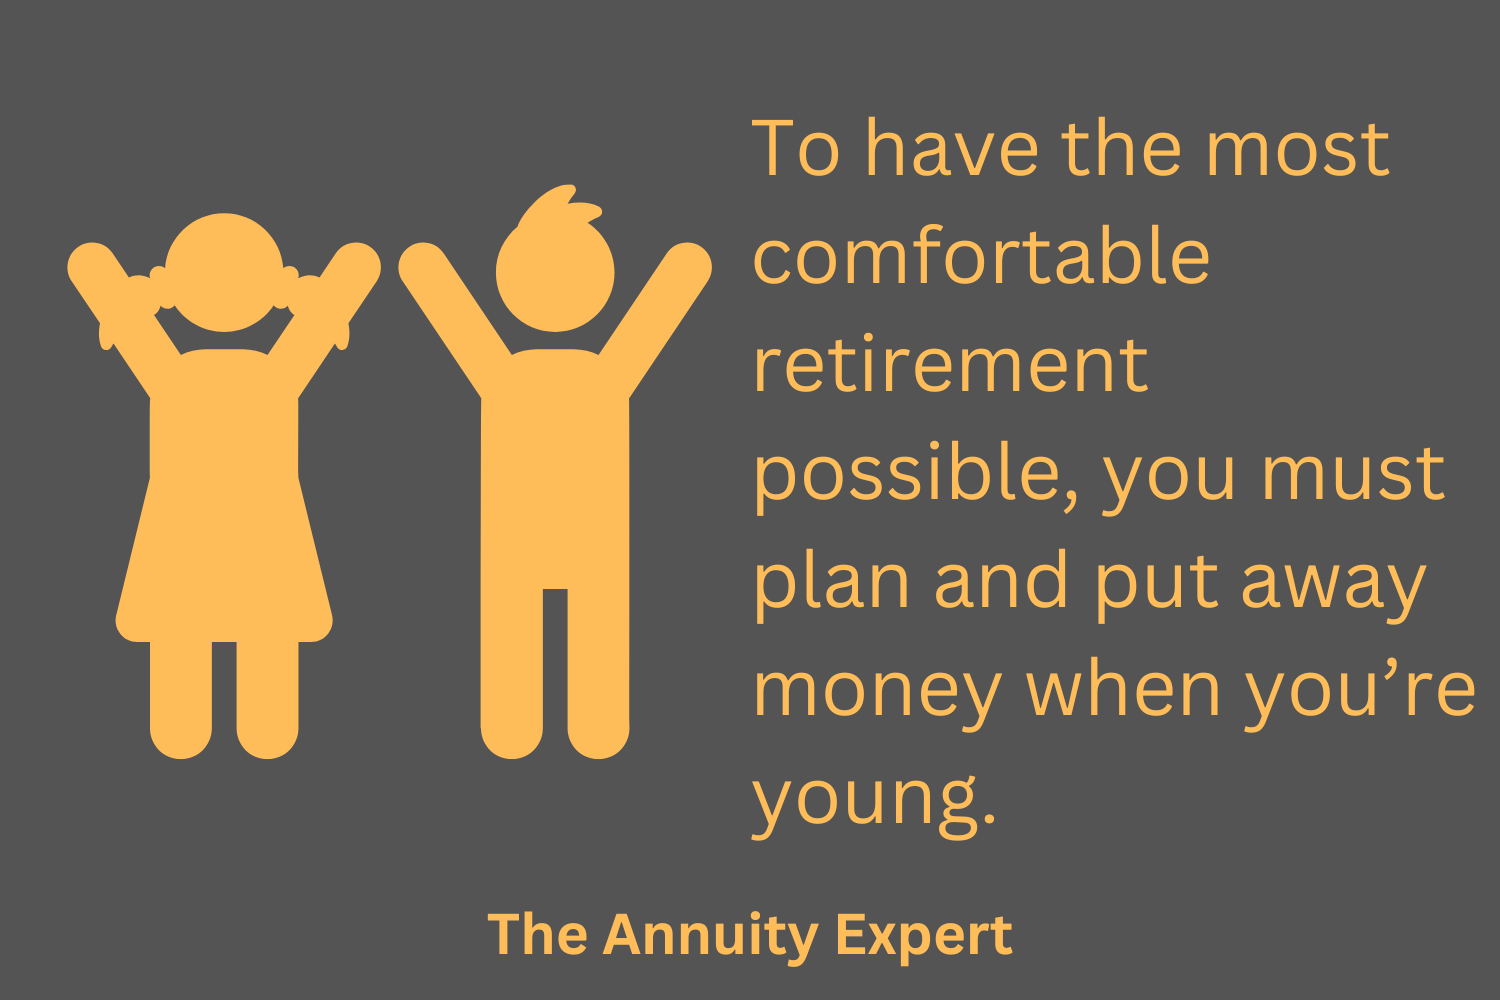 How Do You Fund Retirement?